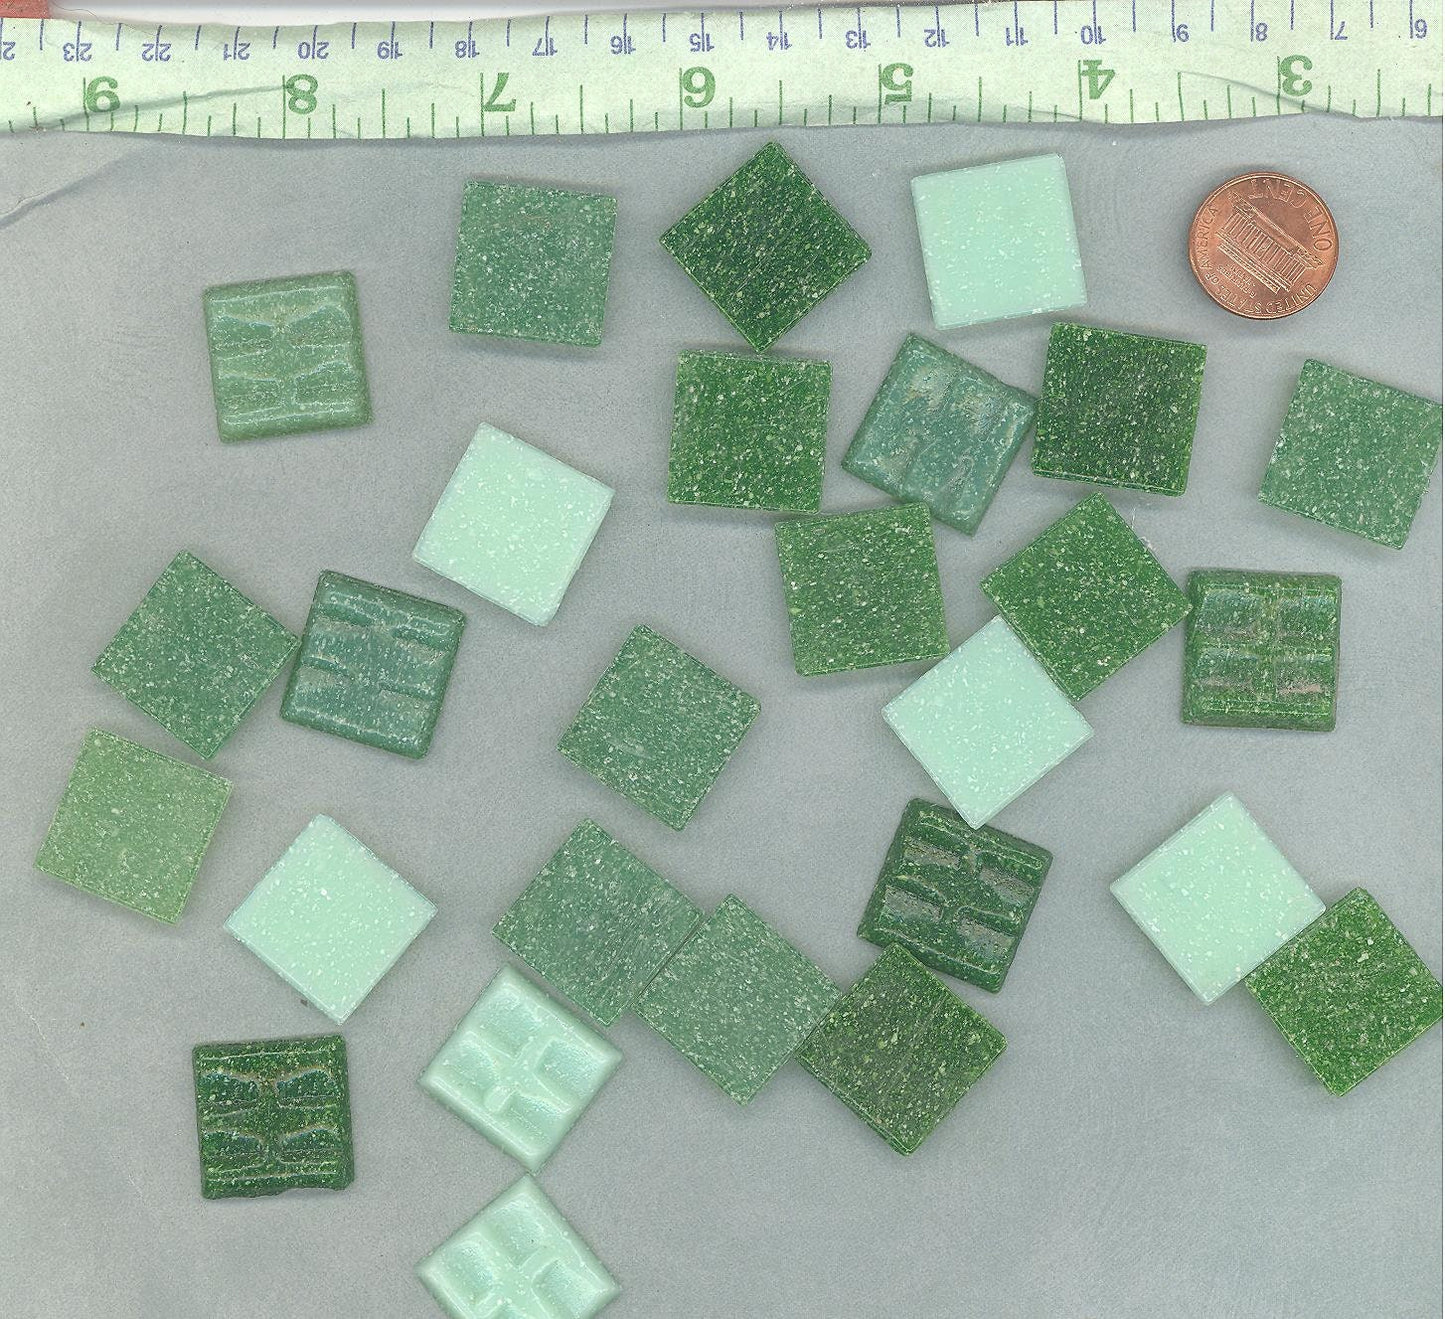 Green Mix Glass Mosaic Tiles Squares - 20mm - Half Pound of Vitreous Glass Tiles for Craft Projects in an Assortment of Greens